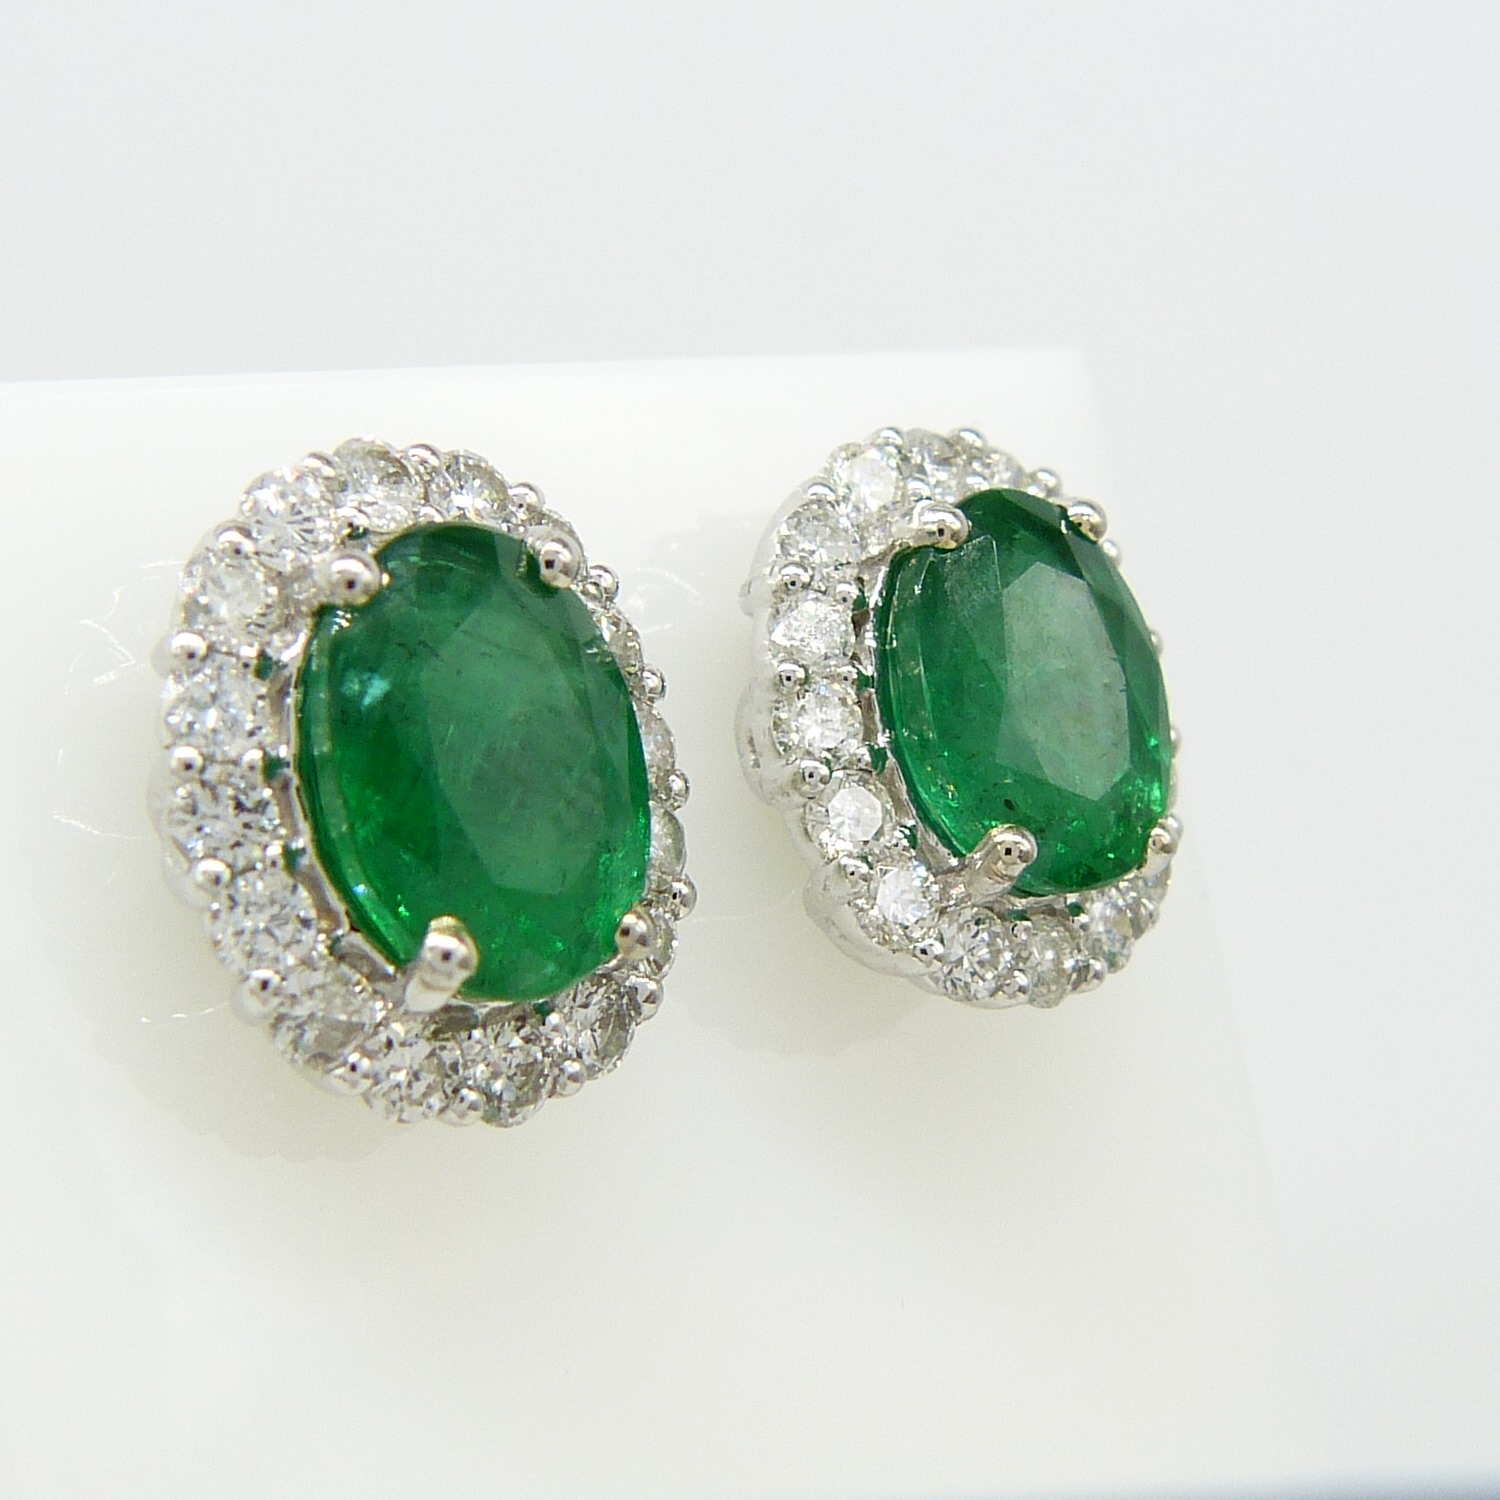 Pair of 18ct white gold 2.48 carat emerald and diamond halo ear studs, boxed - Image 4 of 8